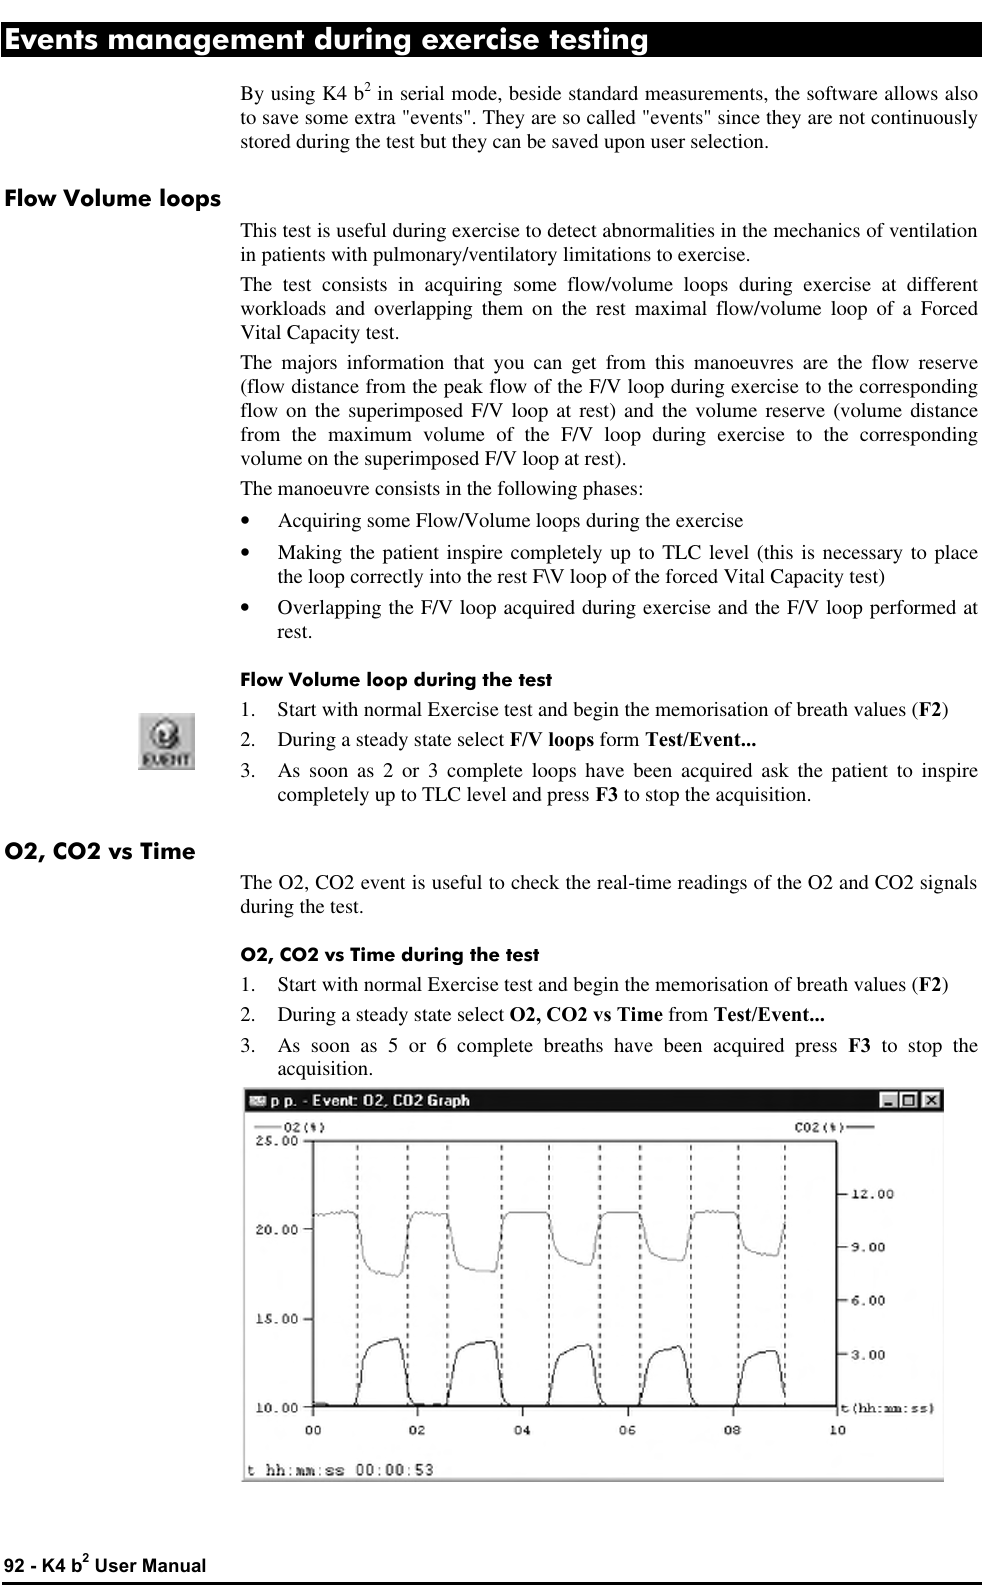  92 - K4 b2 User Manual Events management during exercise testing By using K4 b2 in serial mode, beside standard measurements, the software allows also to save some extra &quot;events&quot;. They are so called &quot;events&quot; since they are not continuously stored during the test but they can be saved upon user selection. Flow Volume loops This test is useful during exercise to detect abnormalities in the mechanics of ventilation in patients with pulmonary/ventilatory limitations to exercise. The test consists in acquiring some flow/volume loops during exercise at different workloads and overlapping them on the rest maximal flow/volume loop of a Forced Vital Capacity test. The majors information that you can get from this manoeuvres are the flow reserve (flow distance from the peak flow of the F/V loop during exercise to the corresponding flow on the superimposed F/V loop at rest) and the volume reserve (volume distance from the maximum volume of the F/V loop during exercise to the corresponding volume on the superimposed F/V loop at rest). The manoeuvre consists in the following phases: • Acquiring some Flow/Volume loops during the exercise • Making the patient inspire completely up to TLC level (this is necessary to place the loop correctly into the rest F\V loop of the forced Vital Capacity test) • Overlapping the F/V loop acquired during exercise and the F/V loop performed at rest. Flow Volume loop during the test 1. Start with normal Exercise test and begin the memorisation of breath values (F2) 2. During a steady state select F/V loops form Test/Event... 3. As soon as 2 or 3 complete loops have been acquired ask the patient to inspire completely up to TLC level and press F3 to stop the acquisition. O2, CO2 vs Time The O2, CO2 event is useful to check the real-time readings of the O2 and CO2 signals during the test. O2, CO2 vs Time during the test 1. Start with normal Exercise test and begin the memorisation of breath values (F2) 2. During a steady state select O2, CO2 vs Time from Test/Event... 3. As soon as 5 or 6 complete breaths have been acquired press F3 to stop the acquisition.  